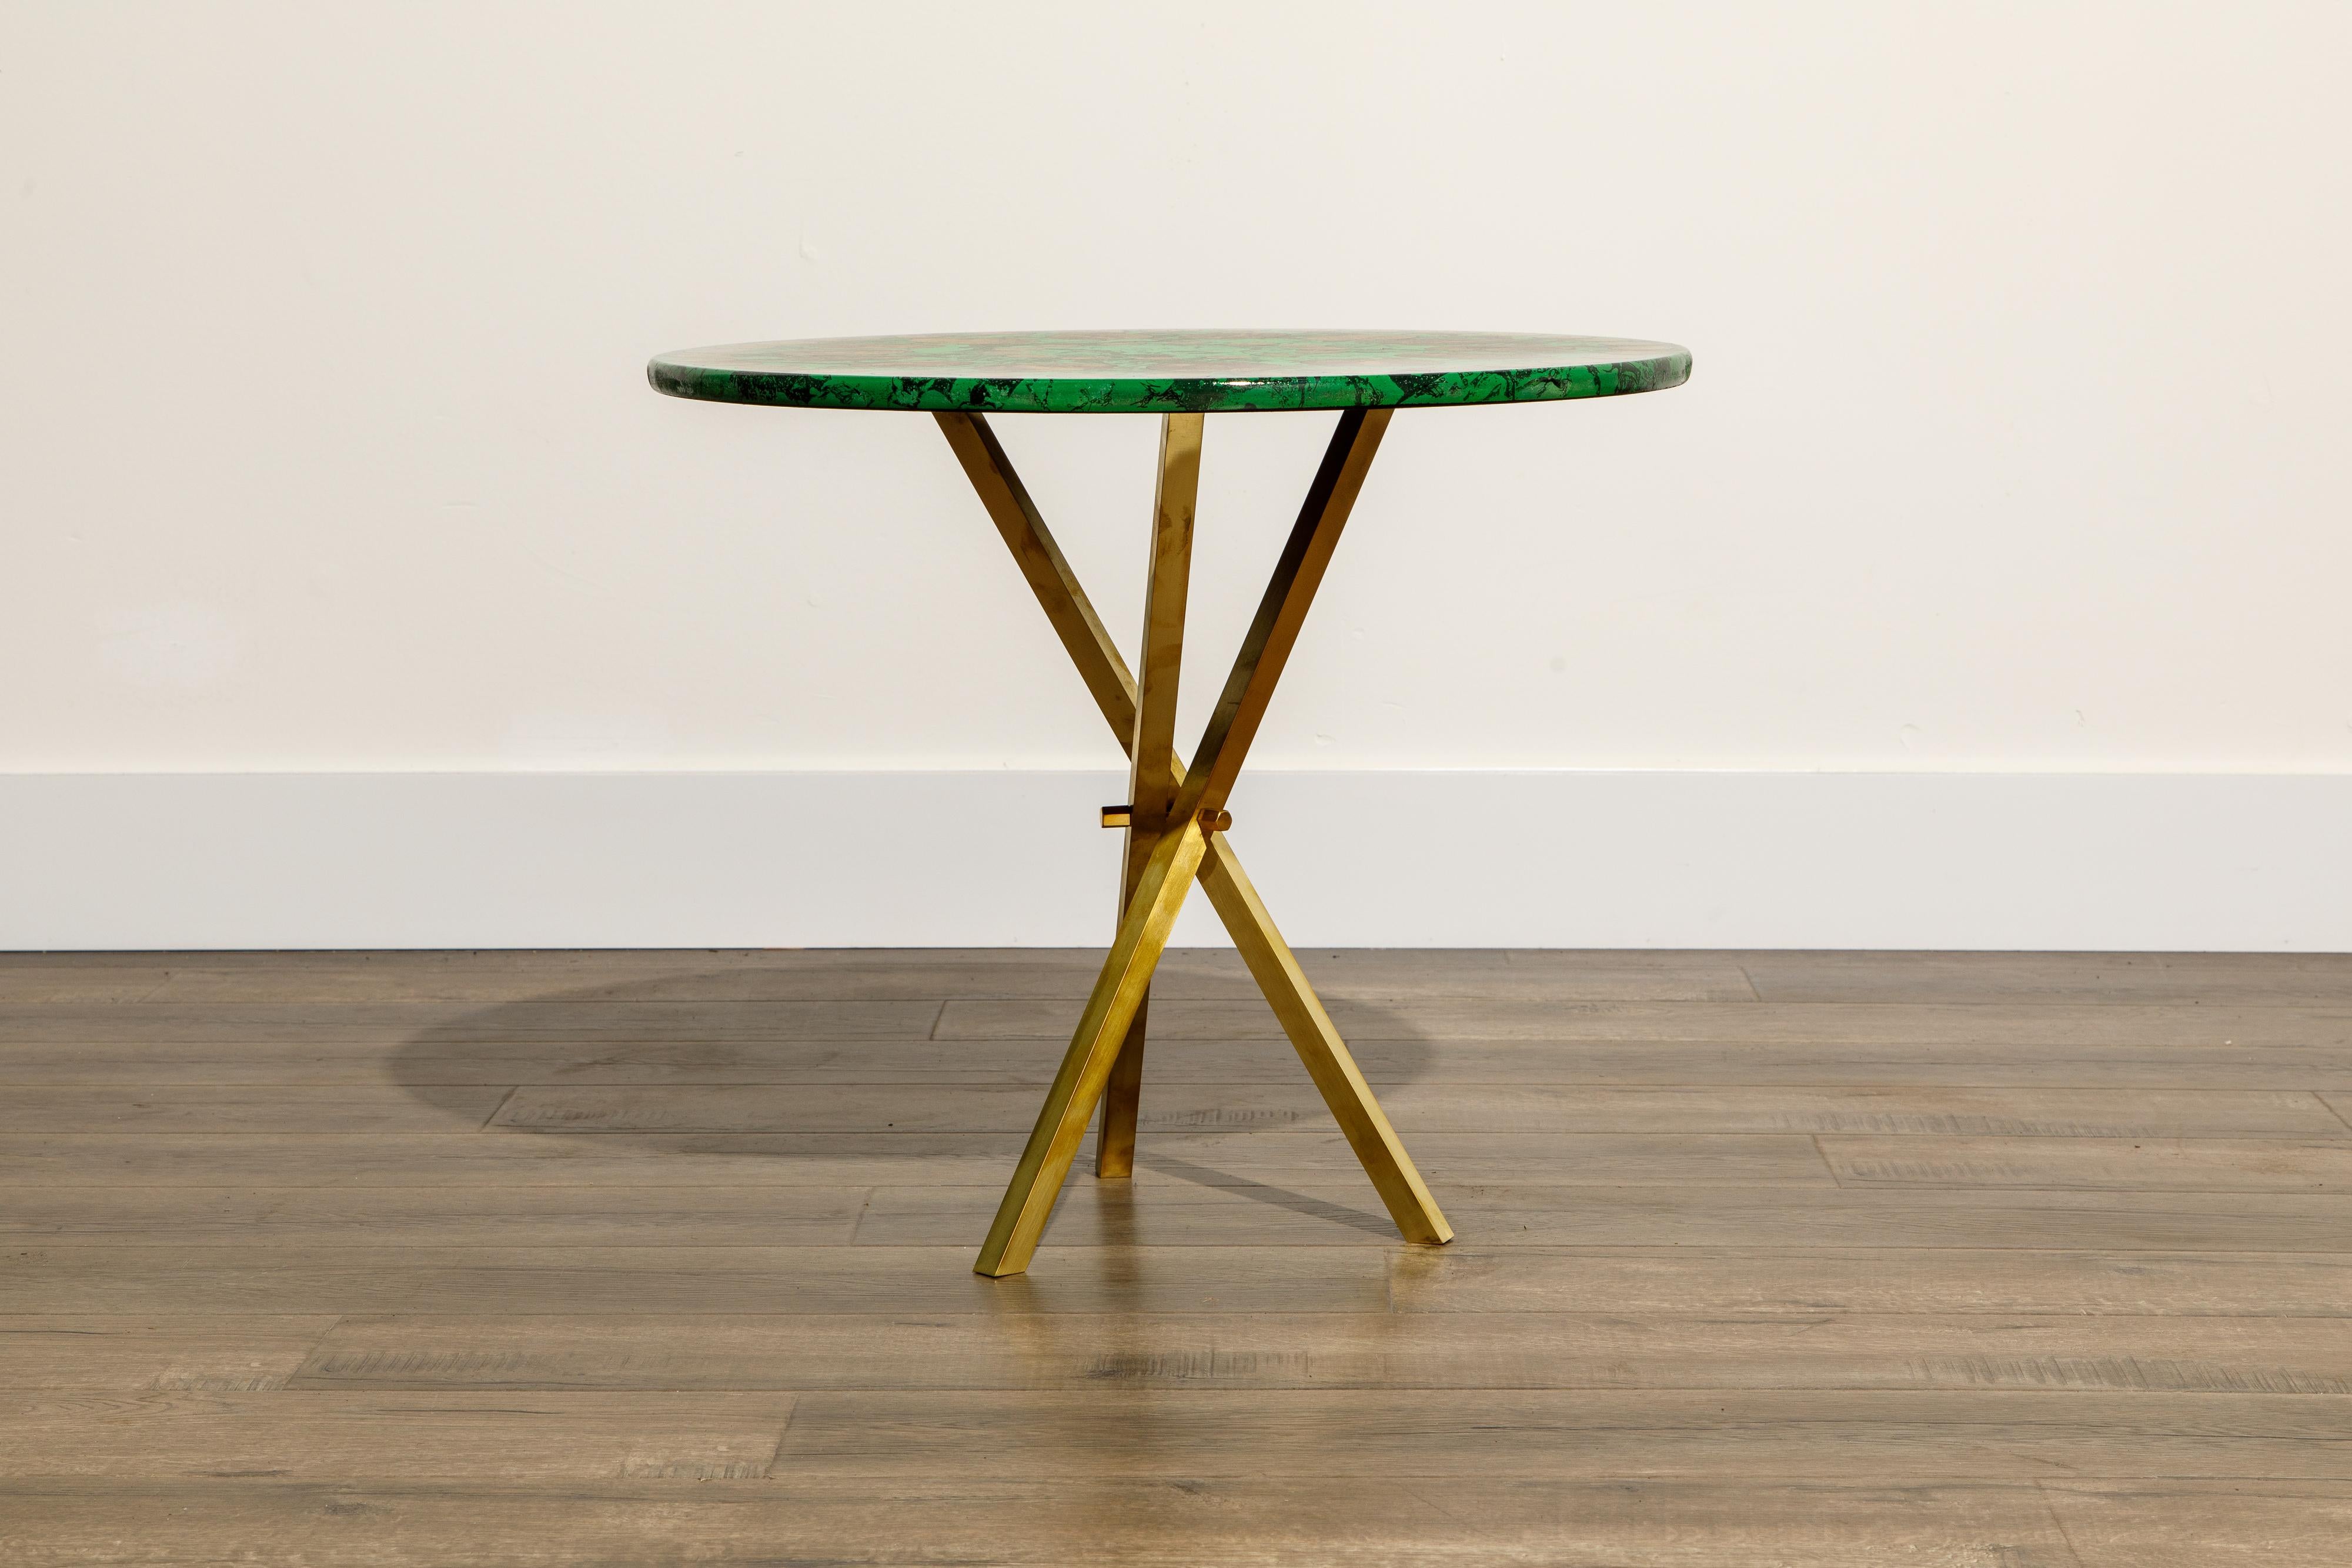 This gorgeous collectors item is a 'Cammei' side table by Piero Fornasetti, signed underneath with its original label. The side table is made with lacquered wood that has a green marble and gold cameo motif and is affixed on top of a brass tripod